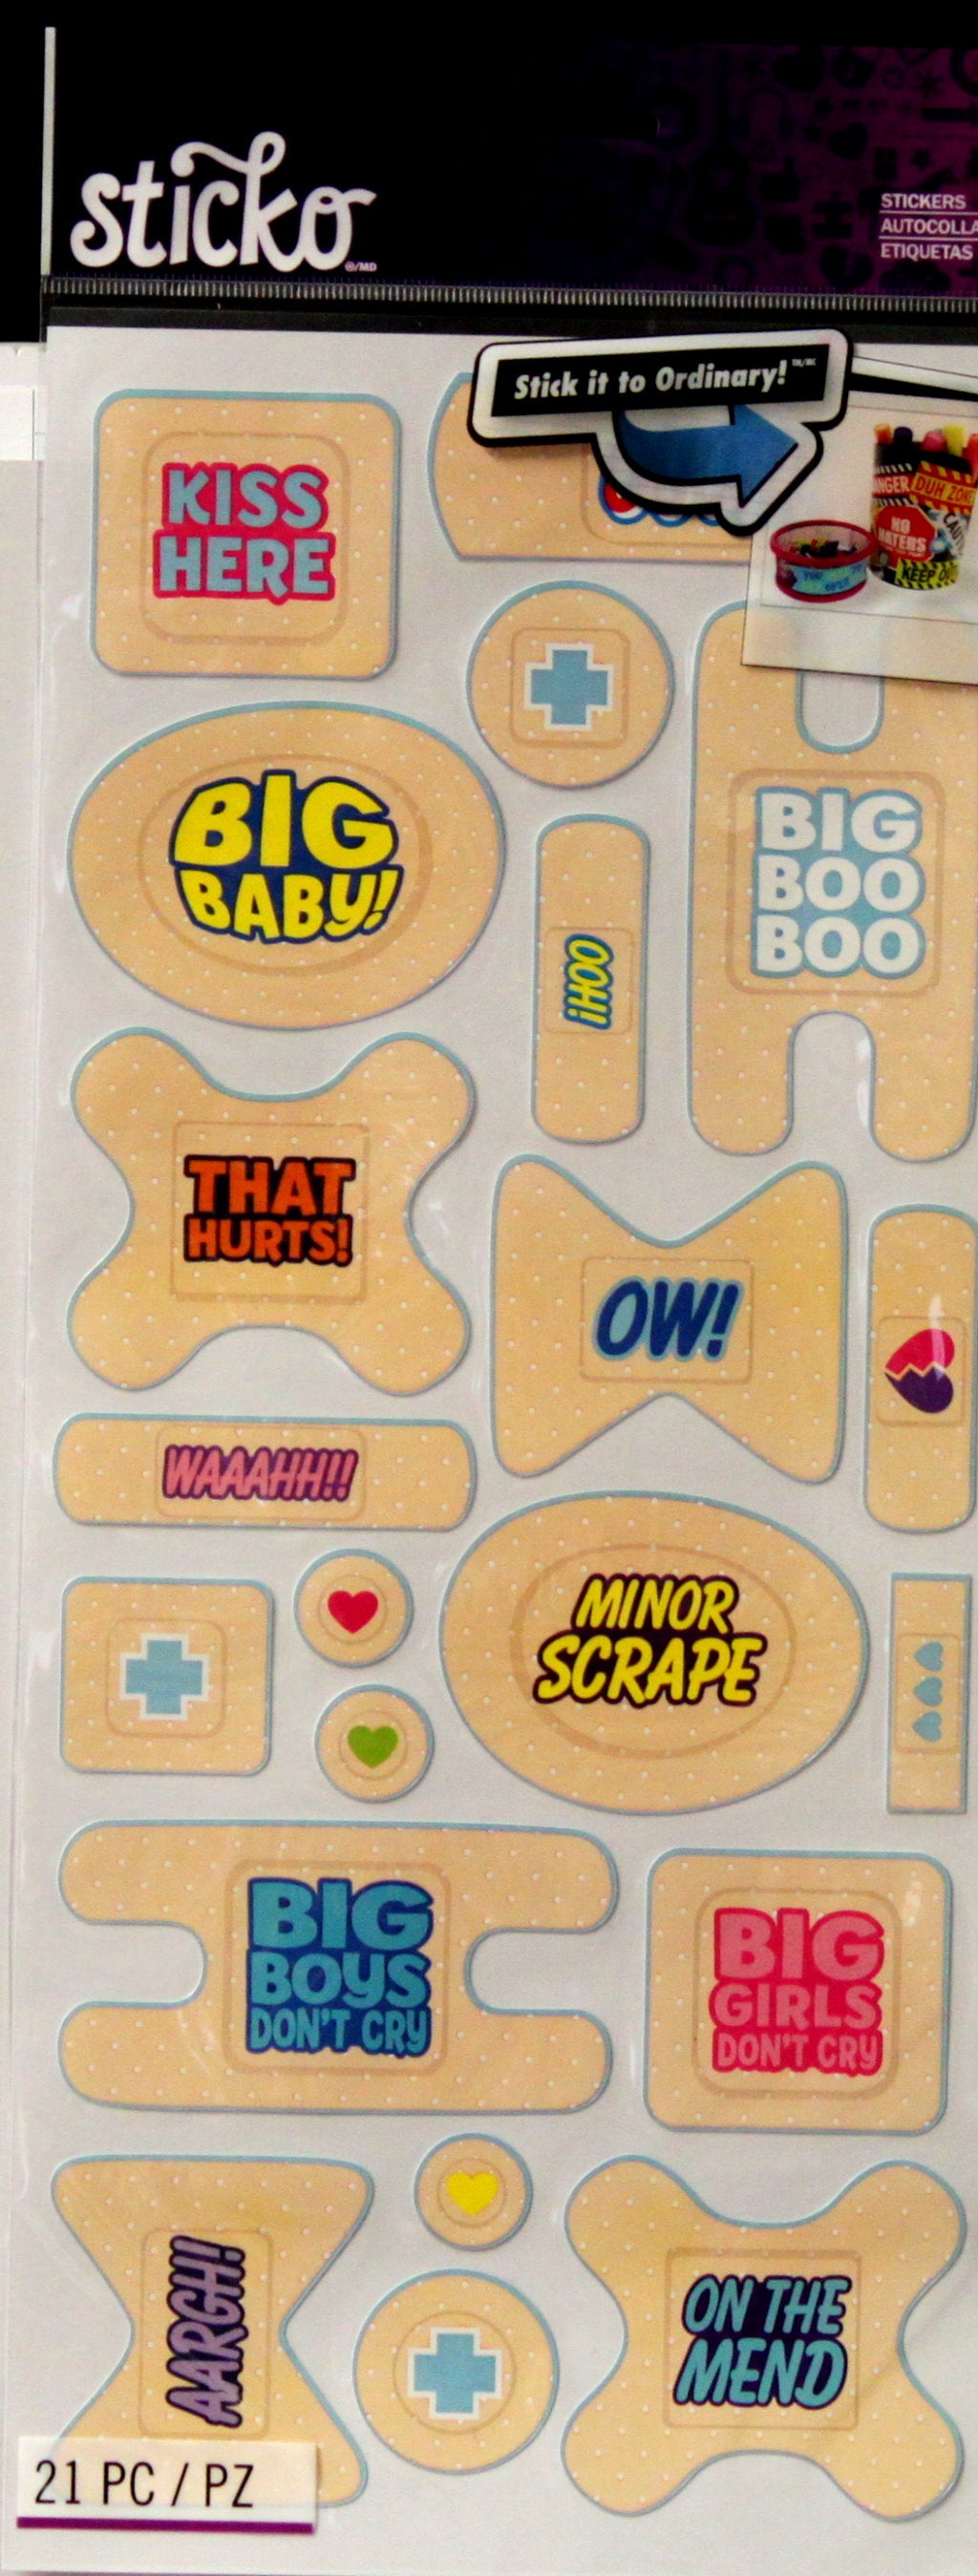 Sticko Bandage Labels Stickers